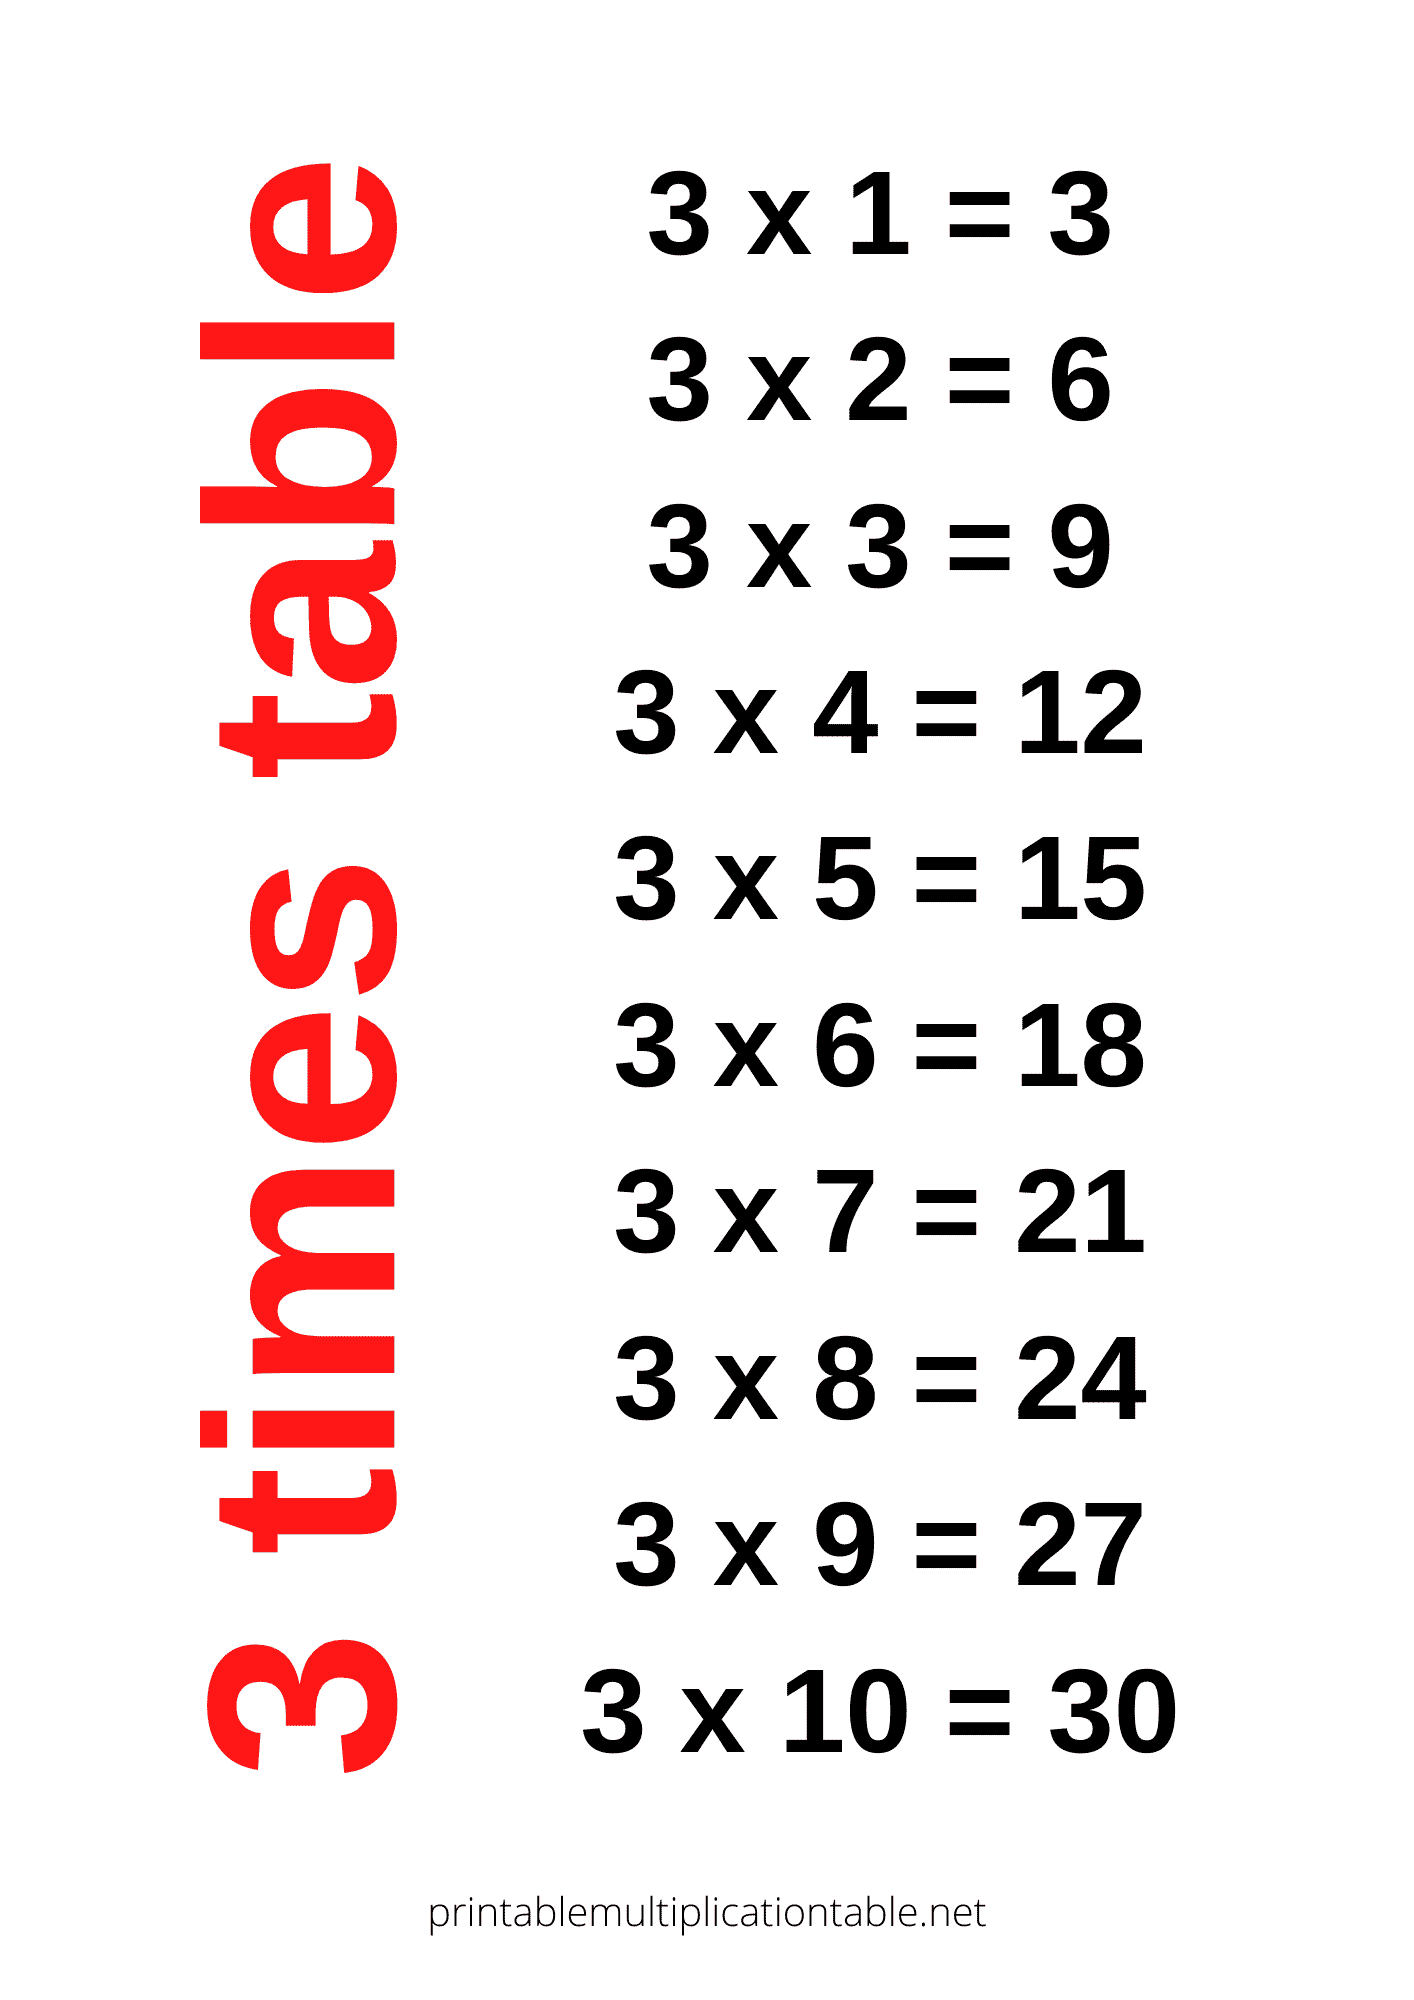 3 times table chart